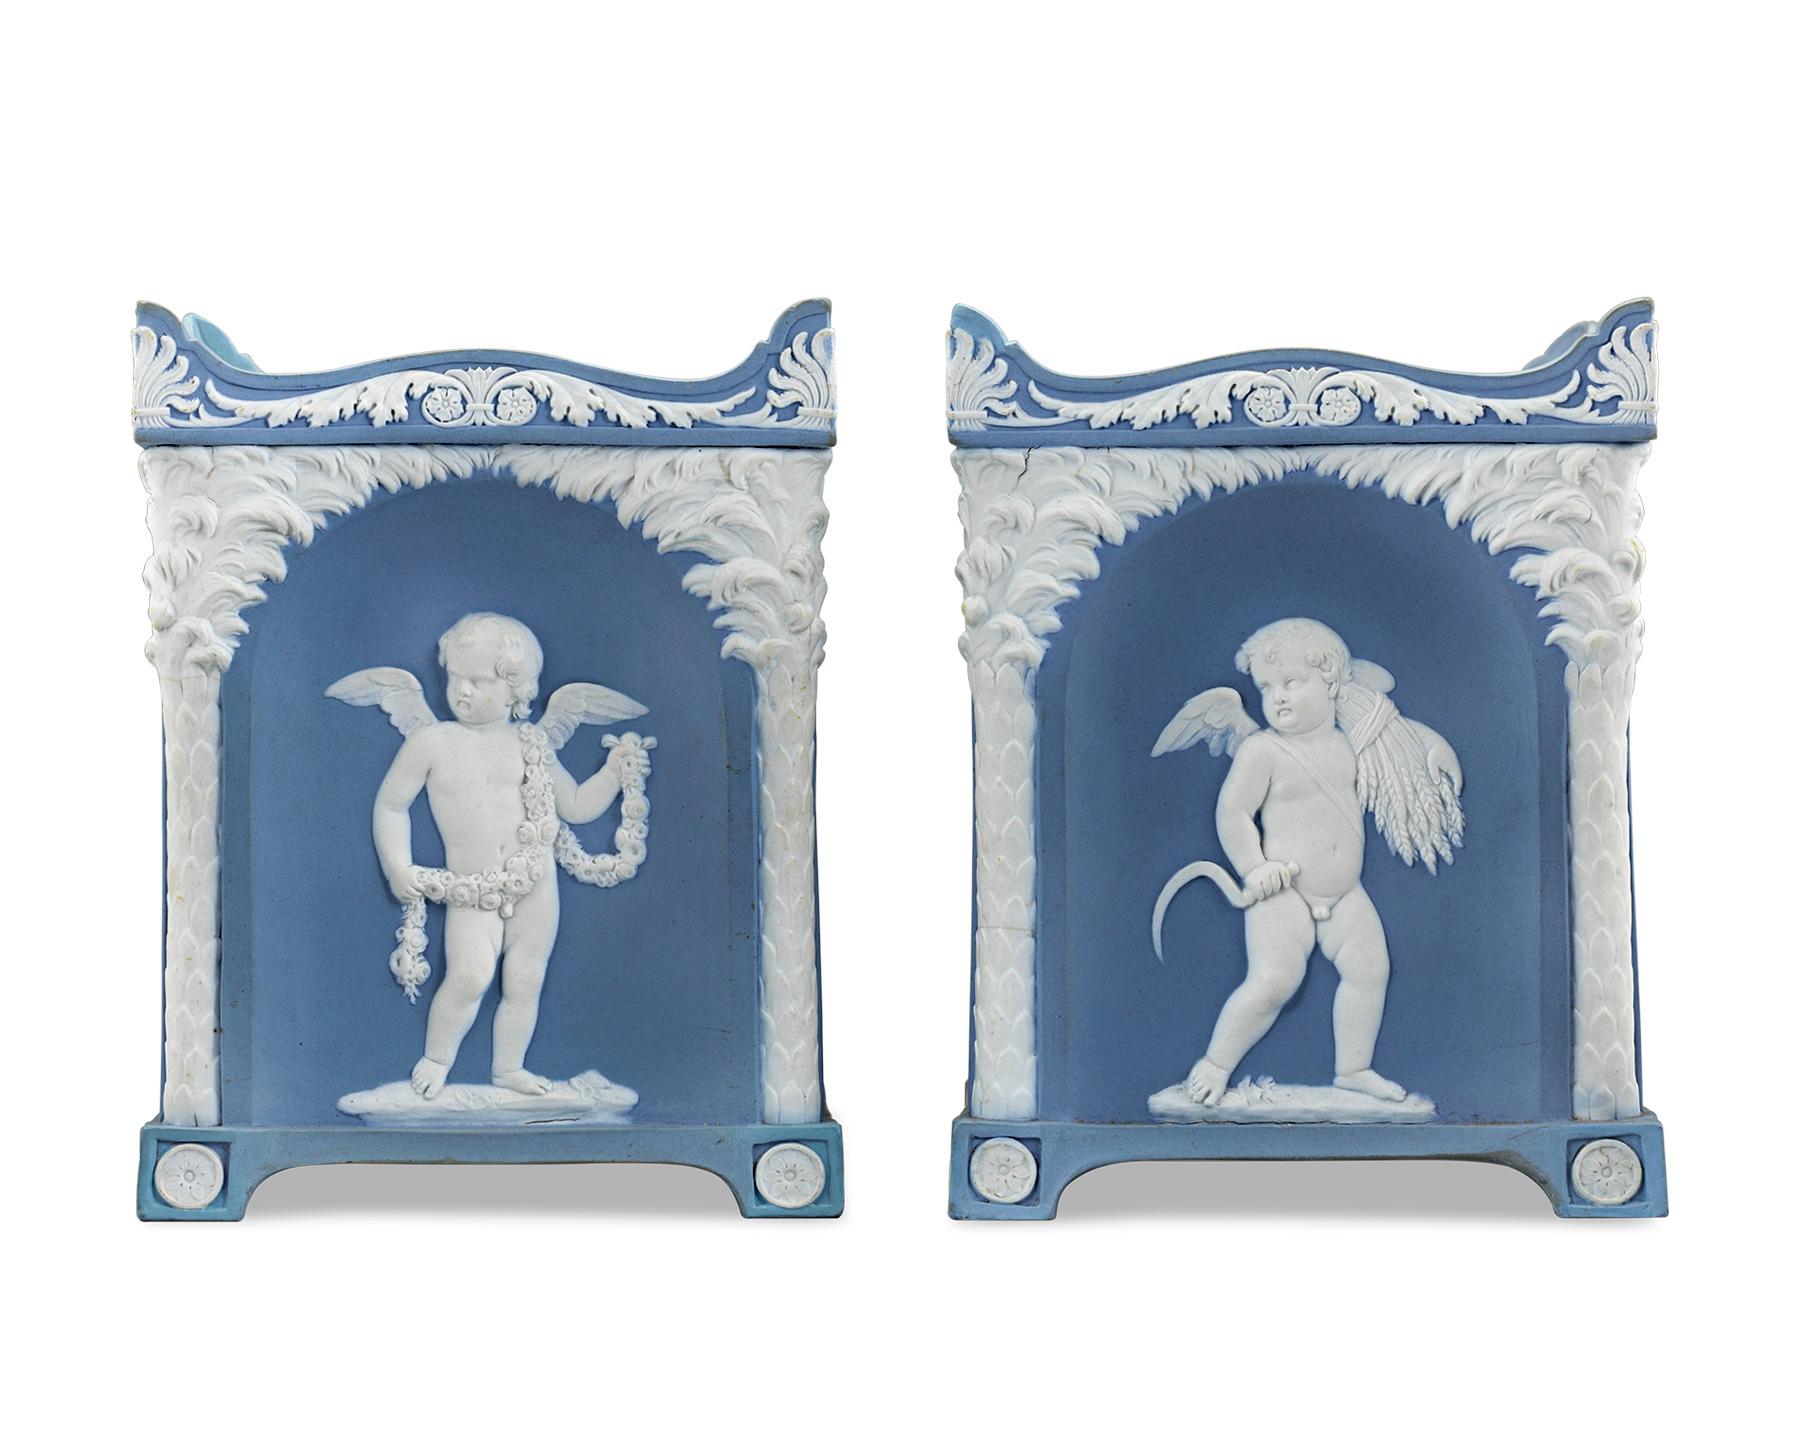 Crafted by Wedgwood, this exquisite and rare pair of square-section bulb pots are comprised of the firm’s famous pale “Wedgwood blue” jasperware so prized by collectors and connoisseurs alike. Winged, putti-like cupid figures adorn each pot’s four